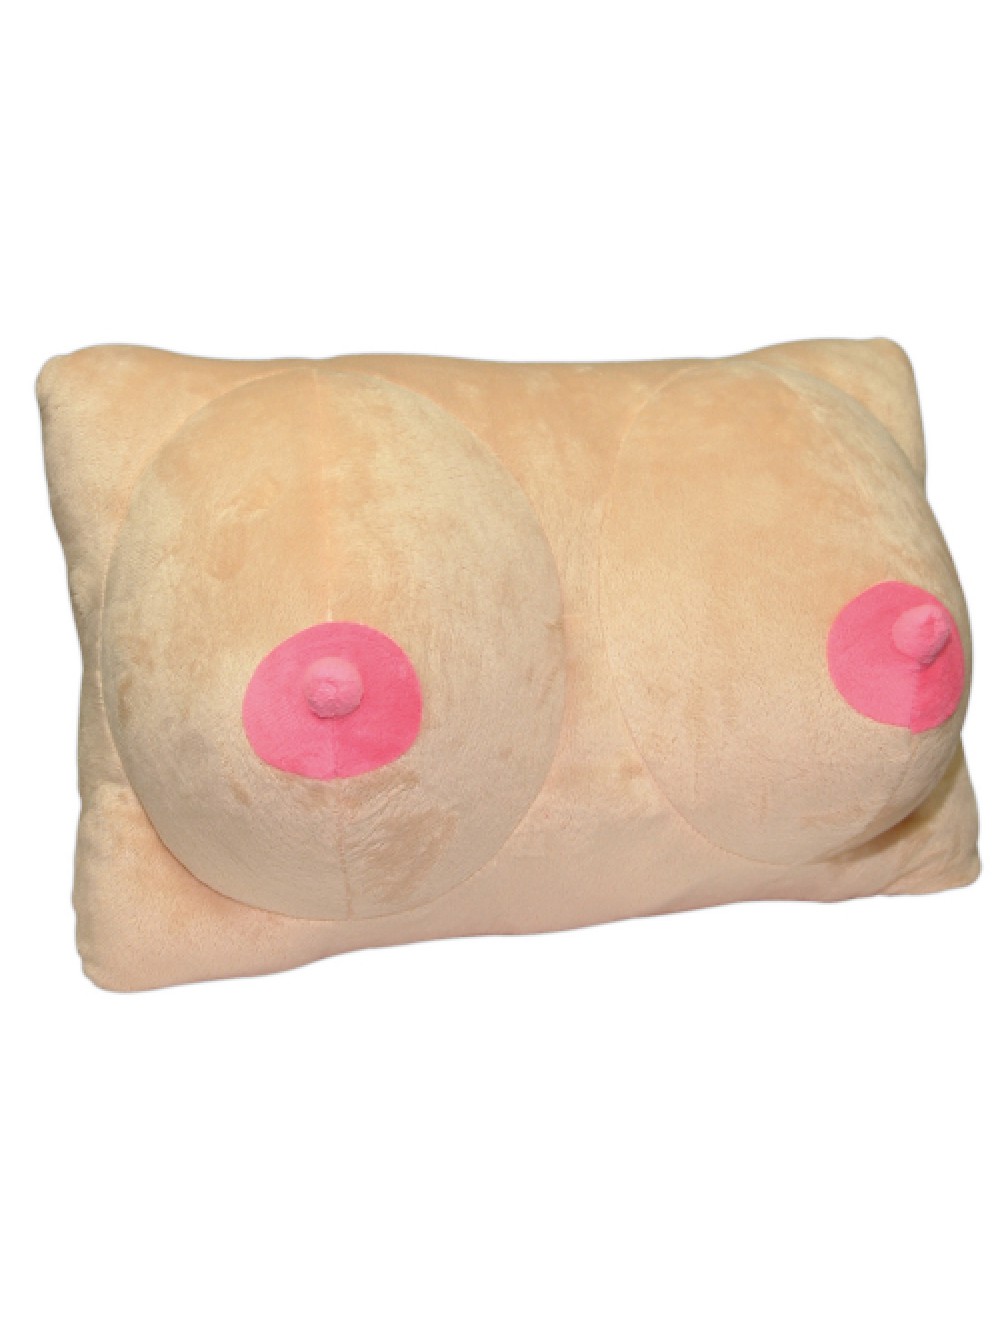 Plush Pillow Breasts